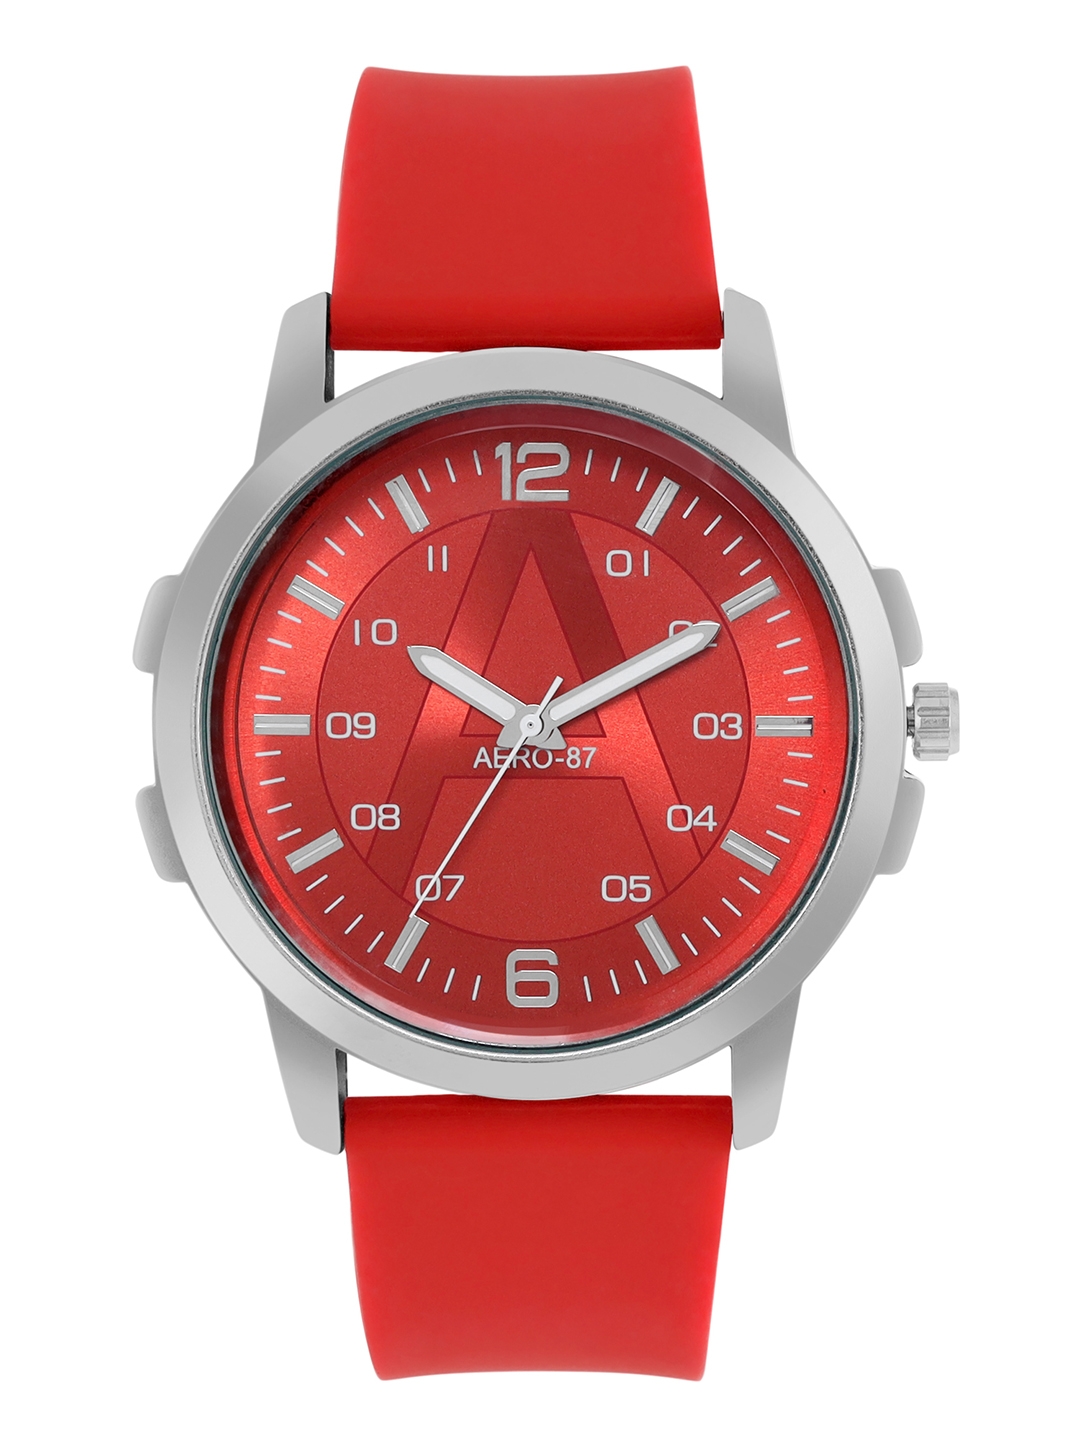 Aeropostale | Aeropostale "AERO_AW_A10-5_RD" Classic Men’s Analog Quartz Wrist Watch, Silver Metal Alloy case, Red Dial with contrasting white hand,